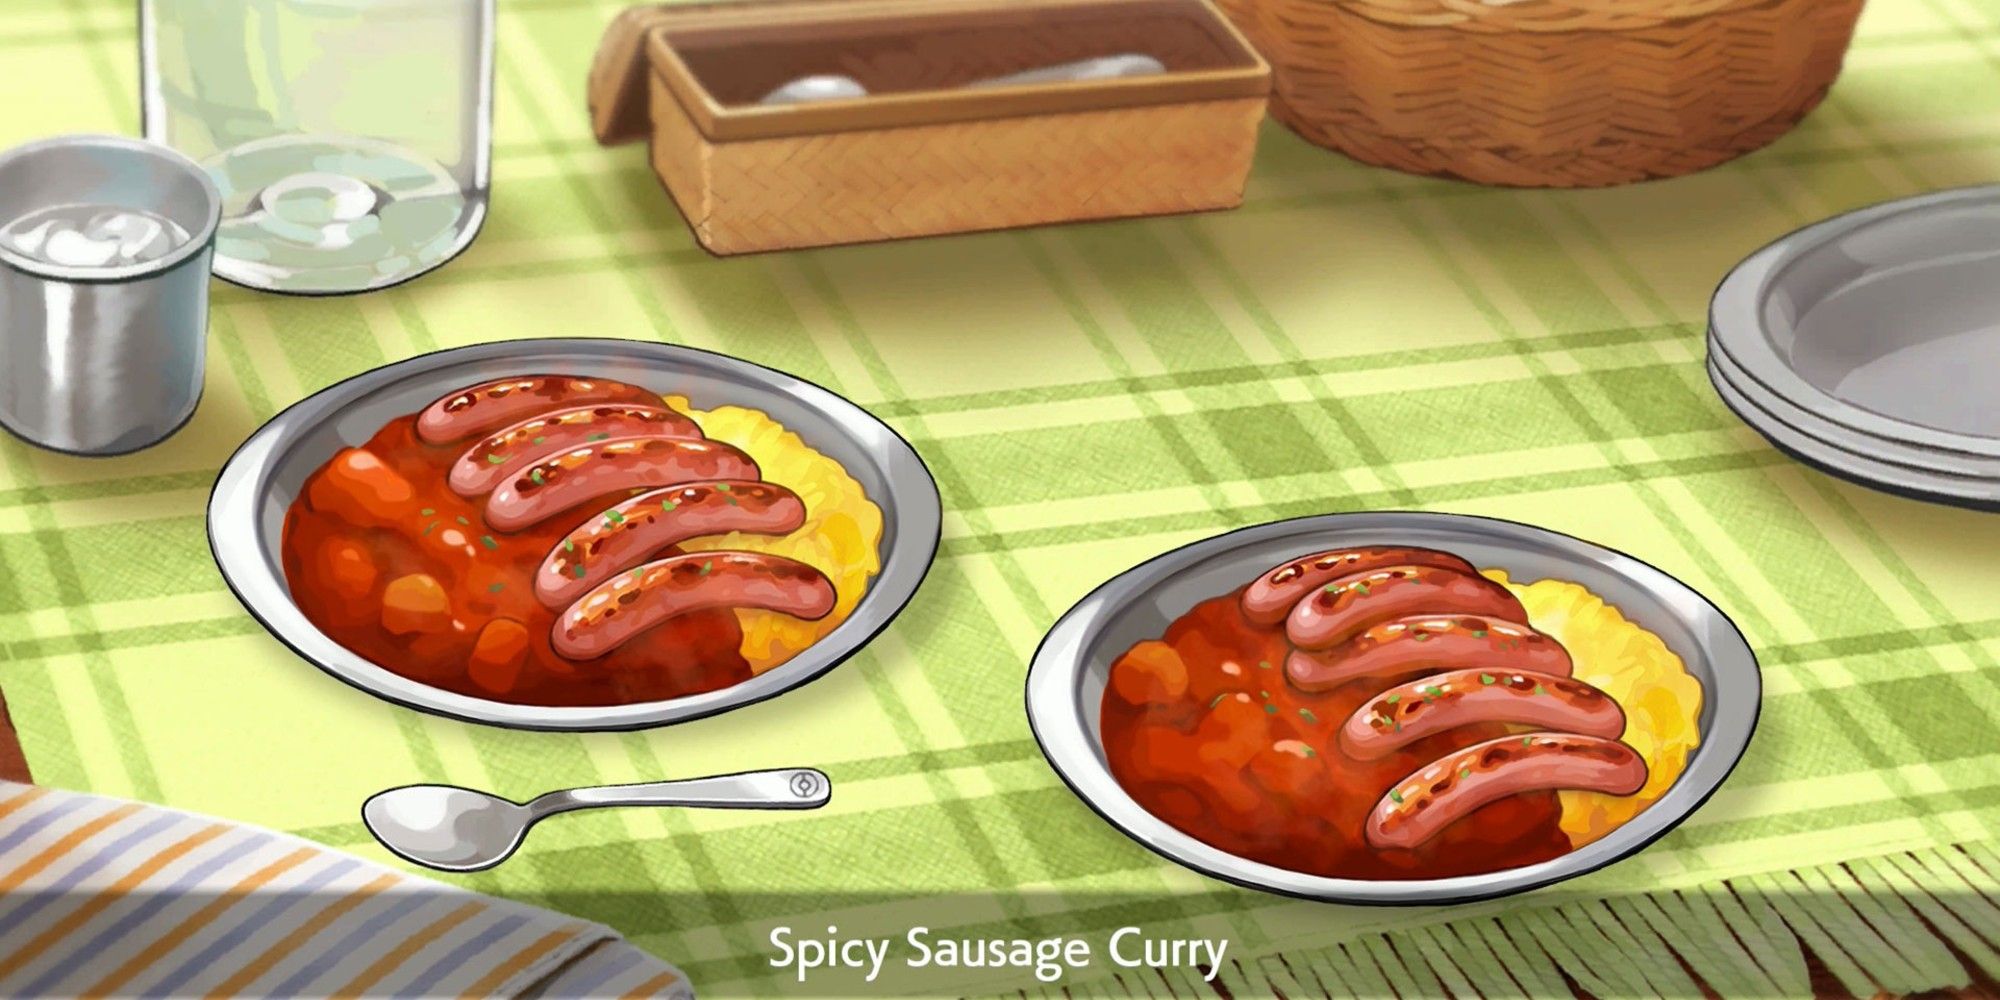 Pokémon Sword & Shield: How to Cook Curry